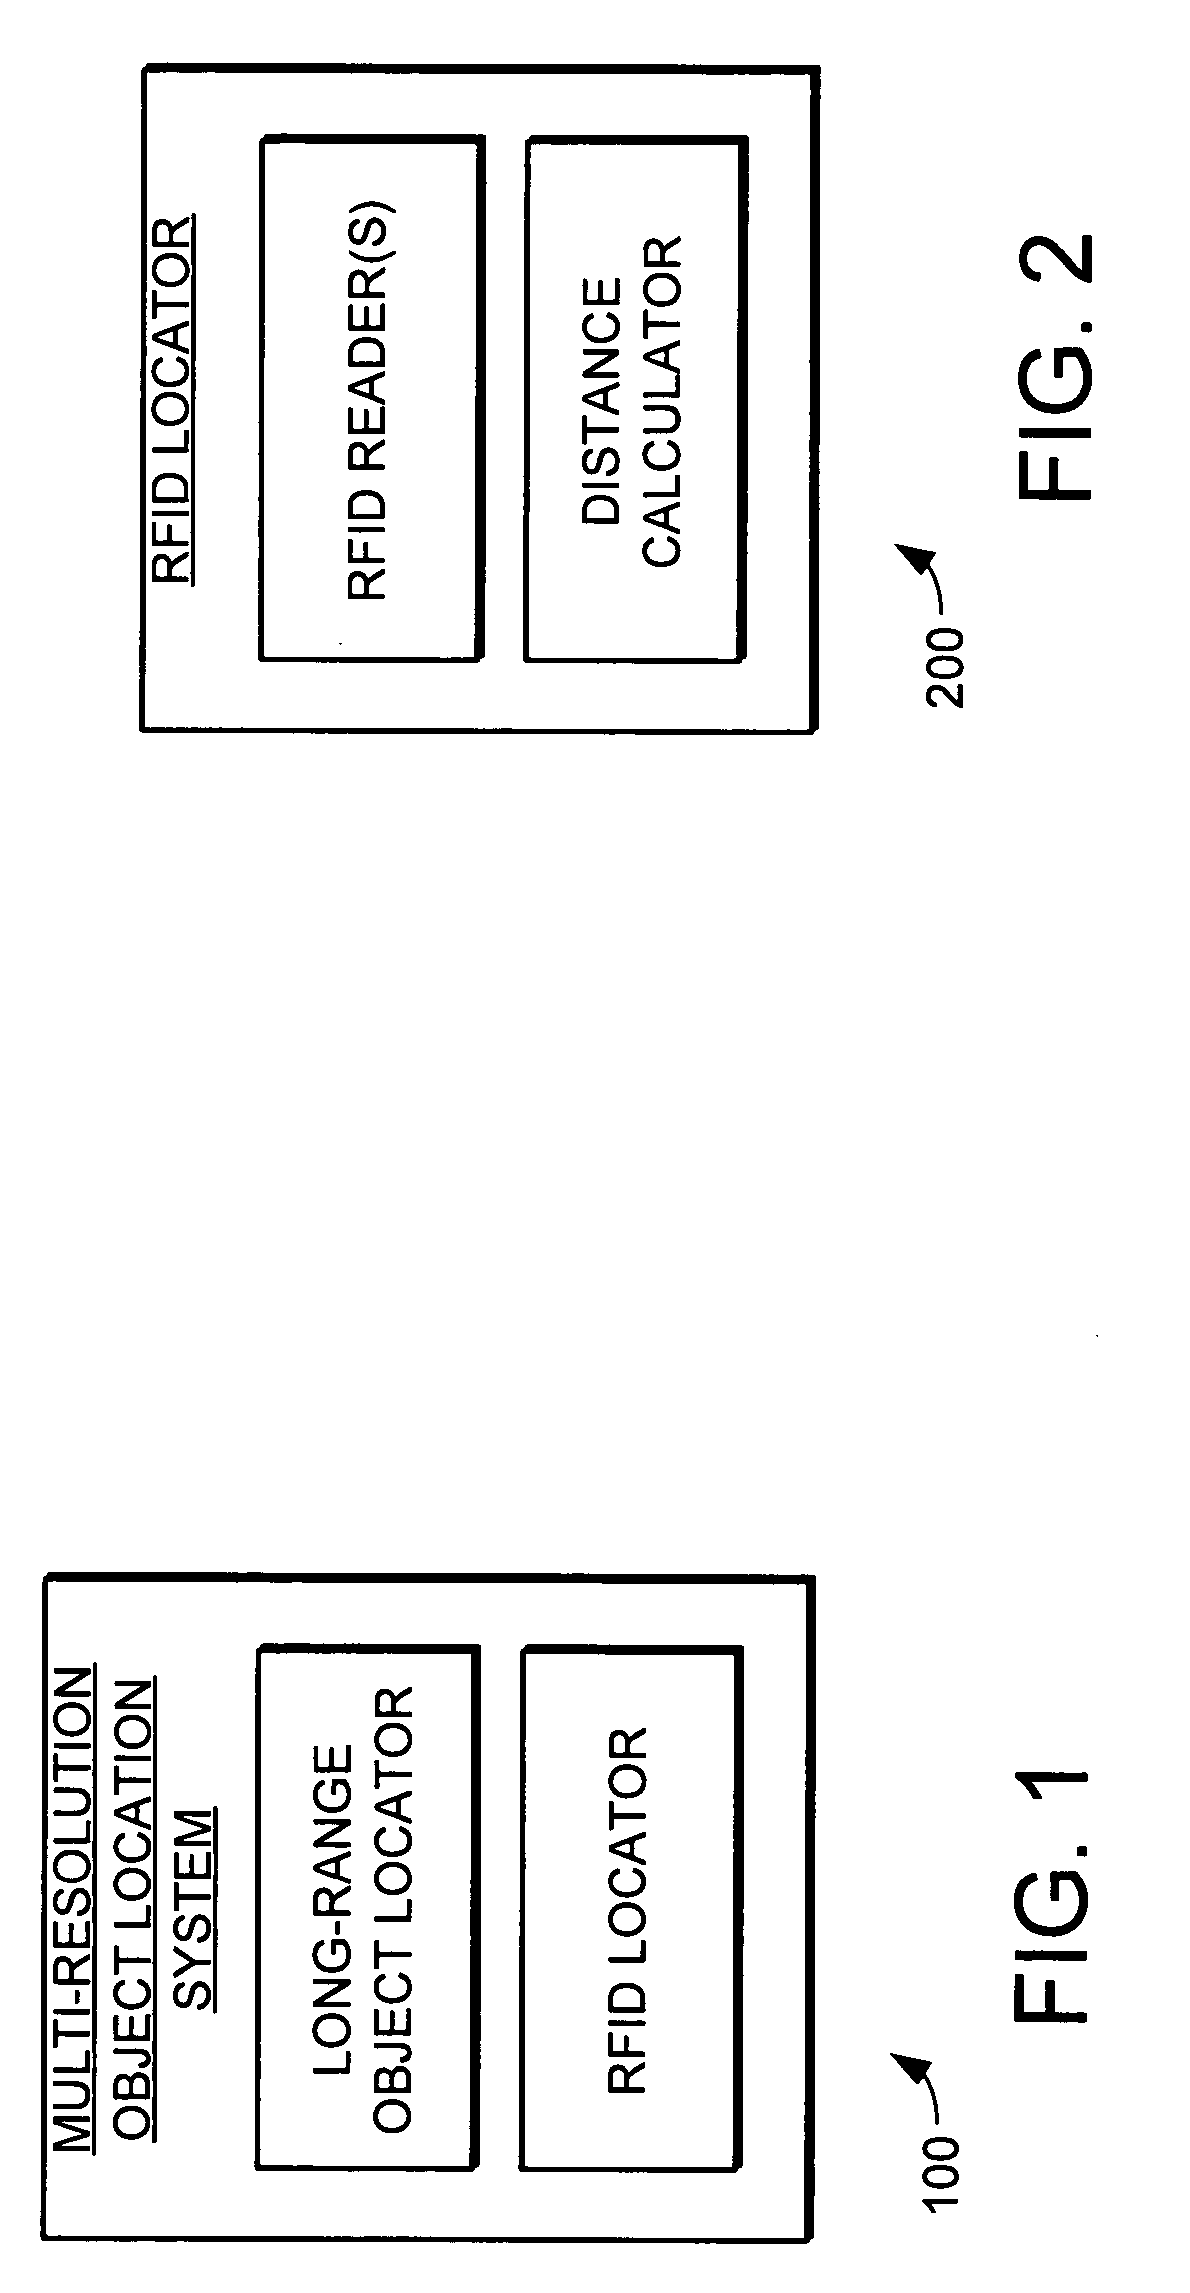 Multi-resolution object location system and method